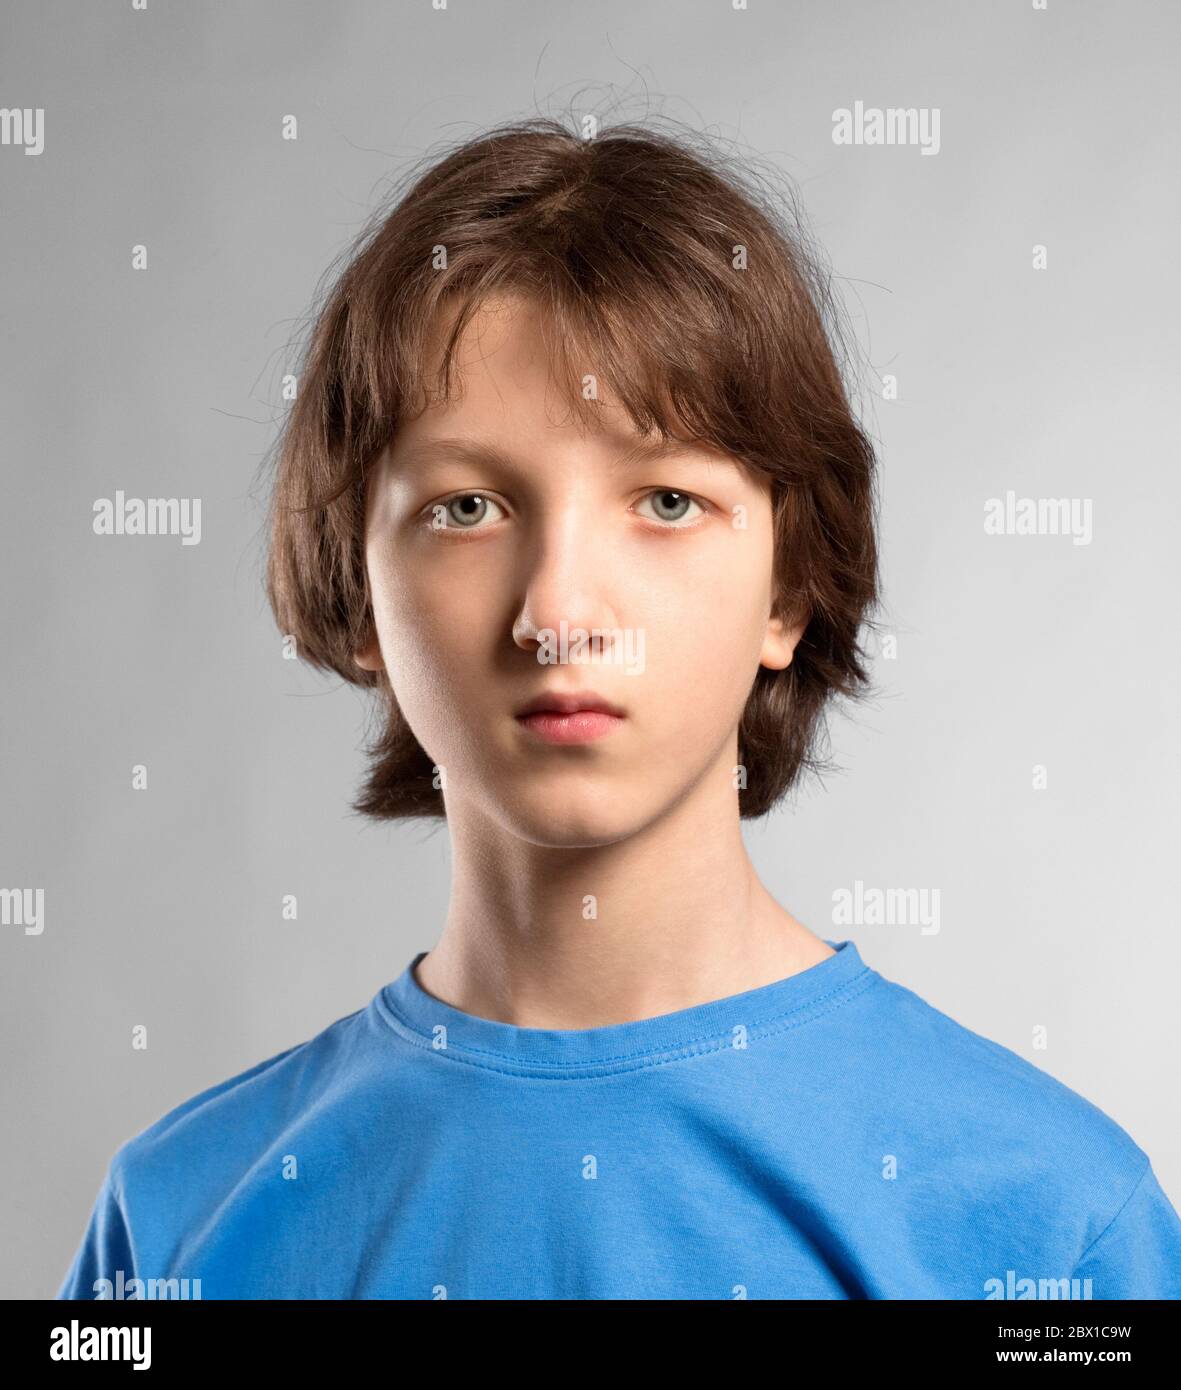 Portrait of a Teenage Boy with Brown Hair in Blue Top. Stock Photo